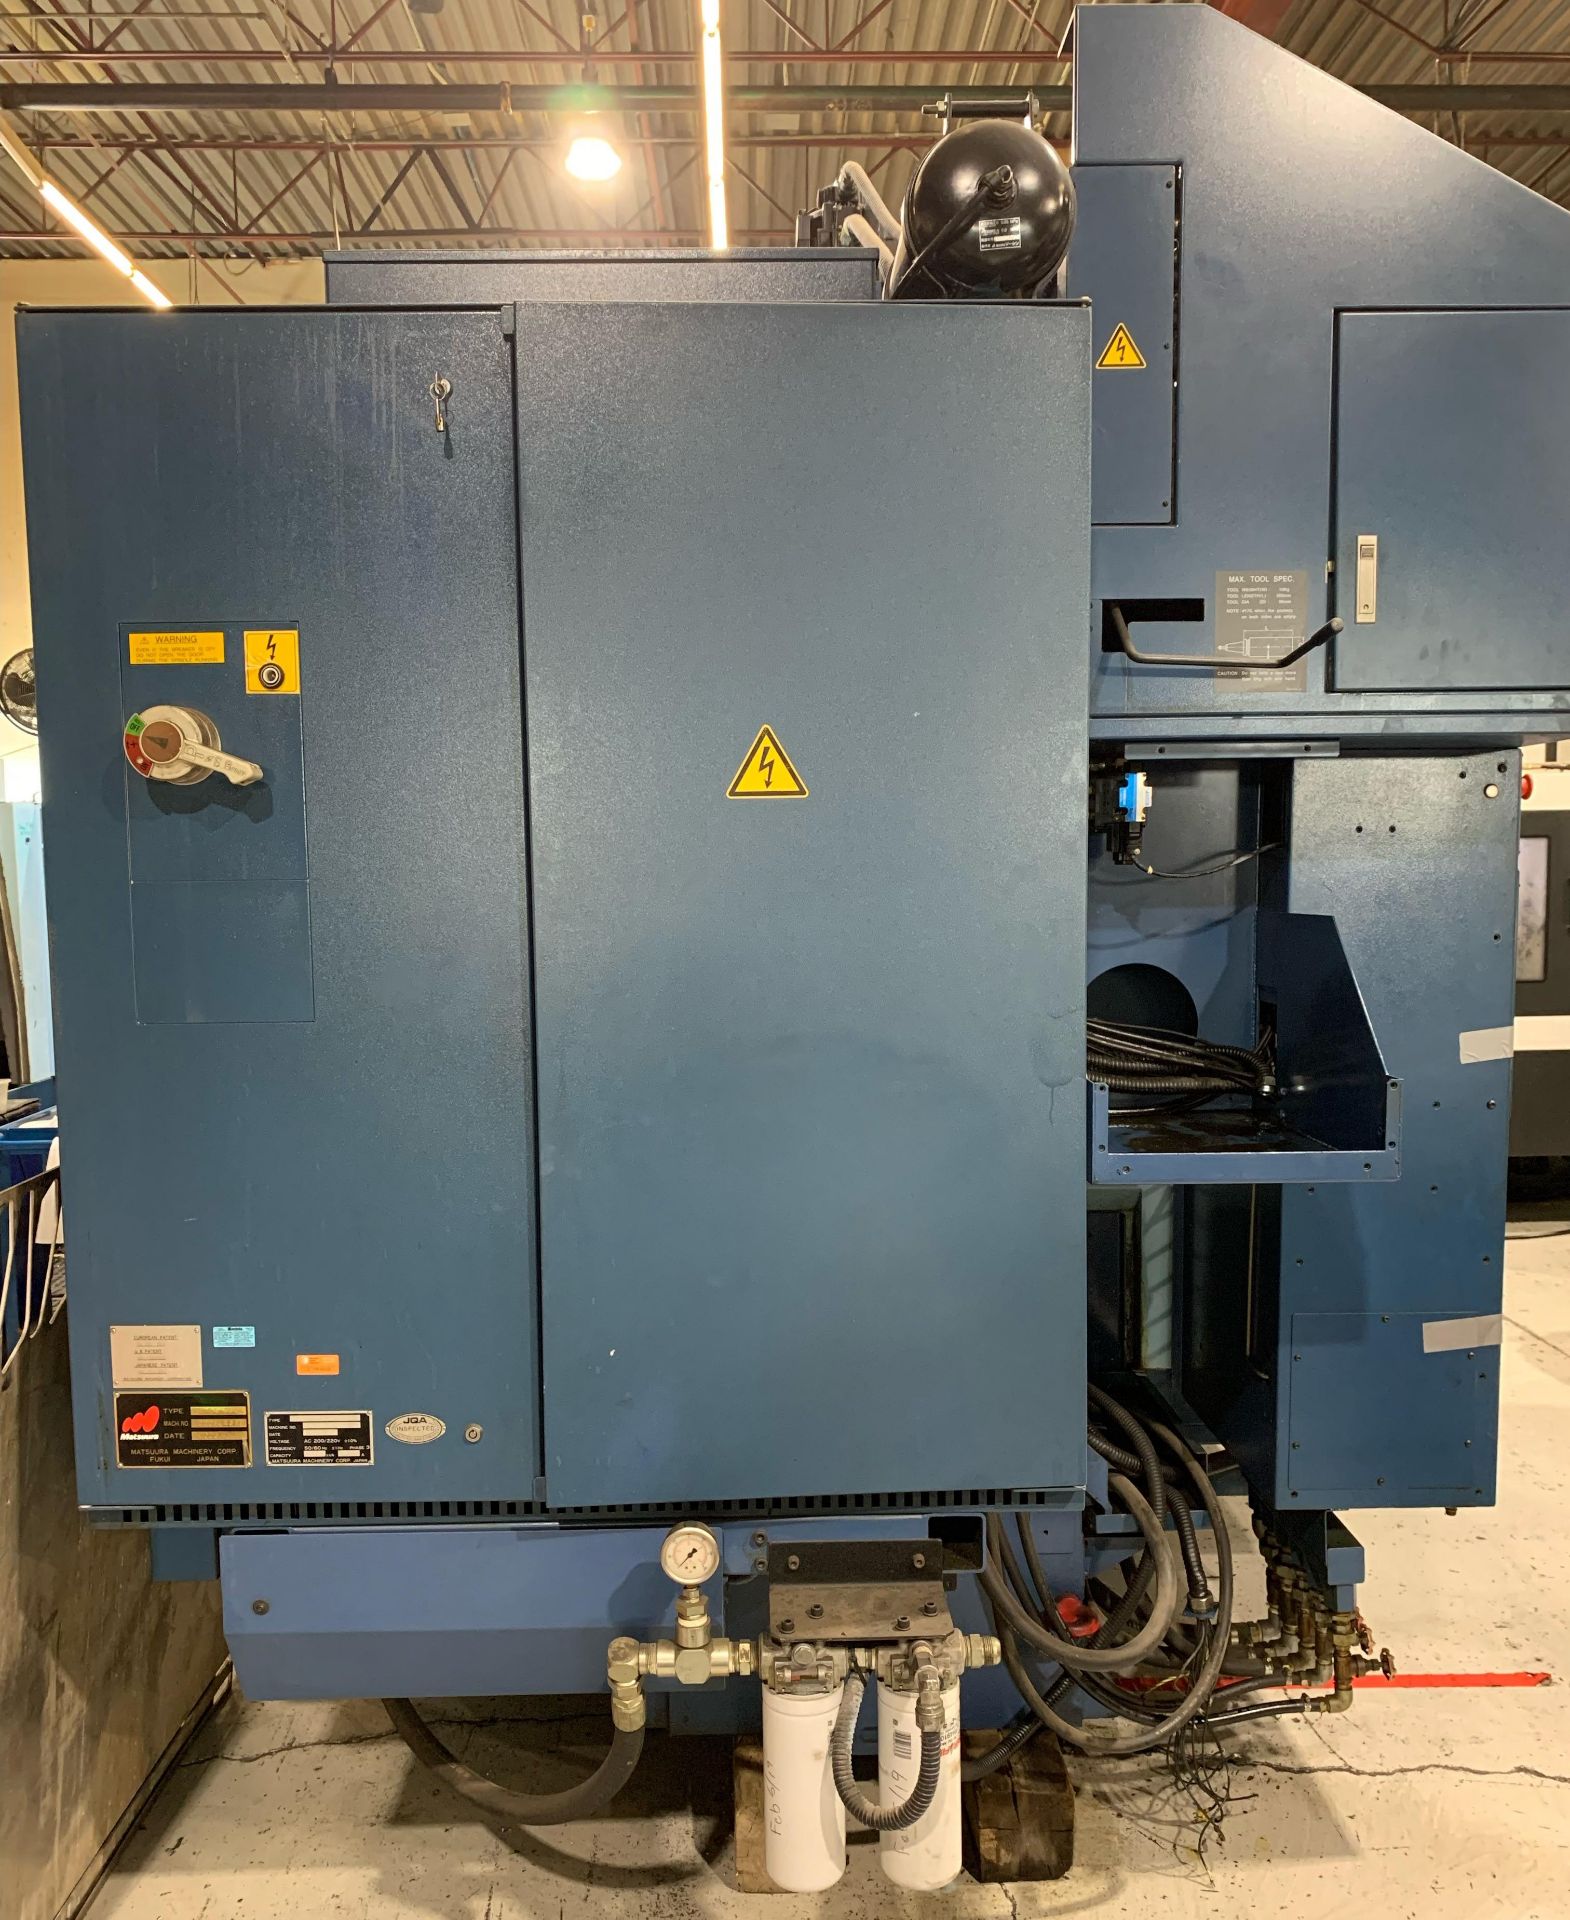 MATSUURA (2000) RA-3G2 TWIN-PALLET VERTICAL MACHINING CENTER WITH YASNAC CNC CONTROL, (2) 31.5" X - Image 9 of 20